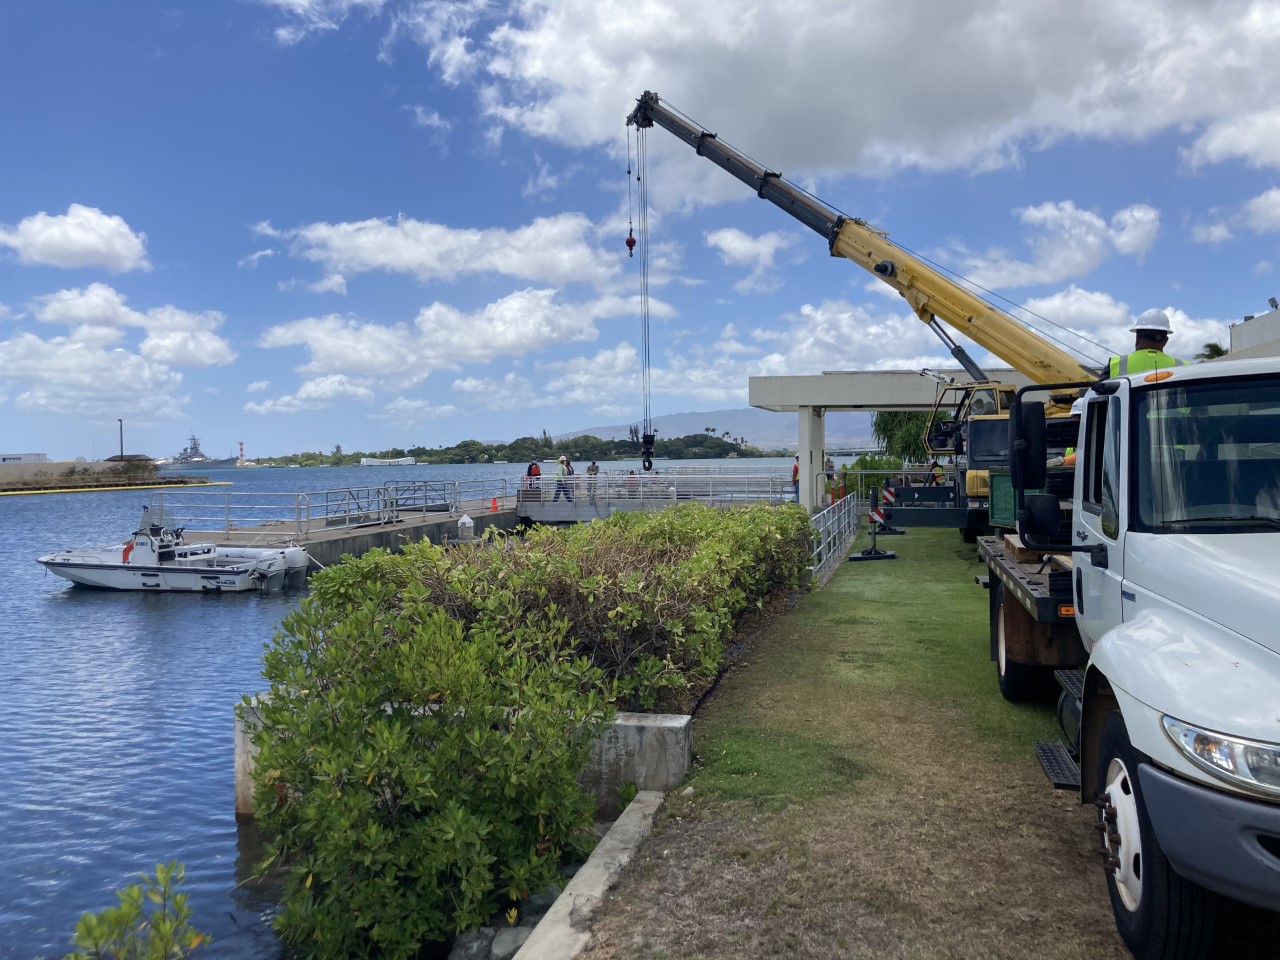 Looking out towards Pearl Harbor, in the foreground a vehicle based crane is parked along side the shoreside dock, as NPS and Navy staff assess the situation.